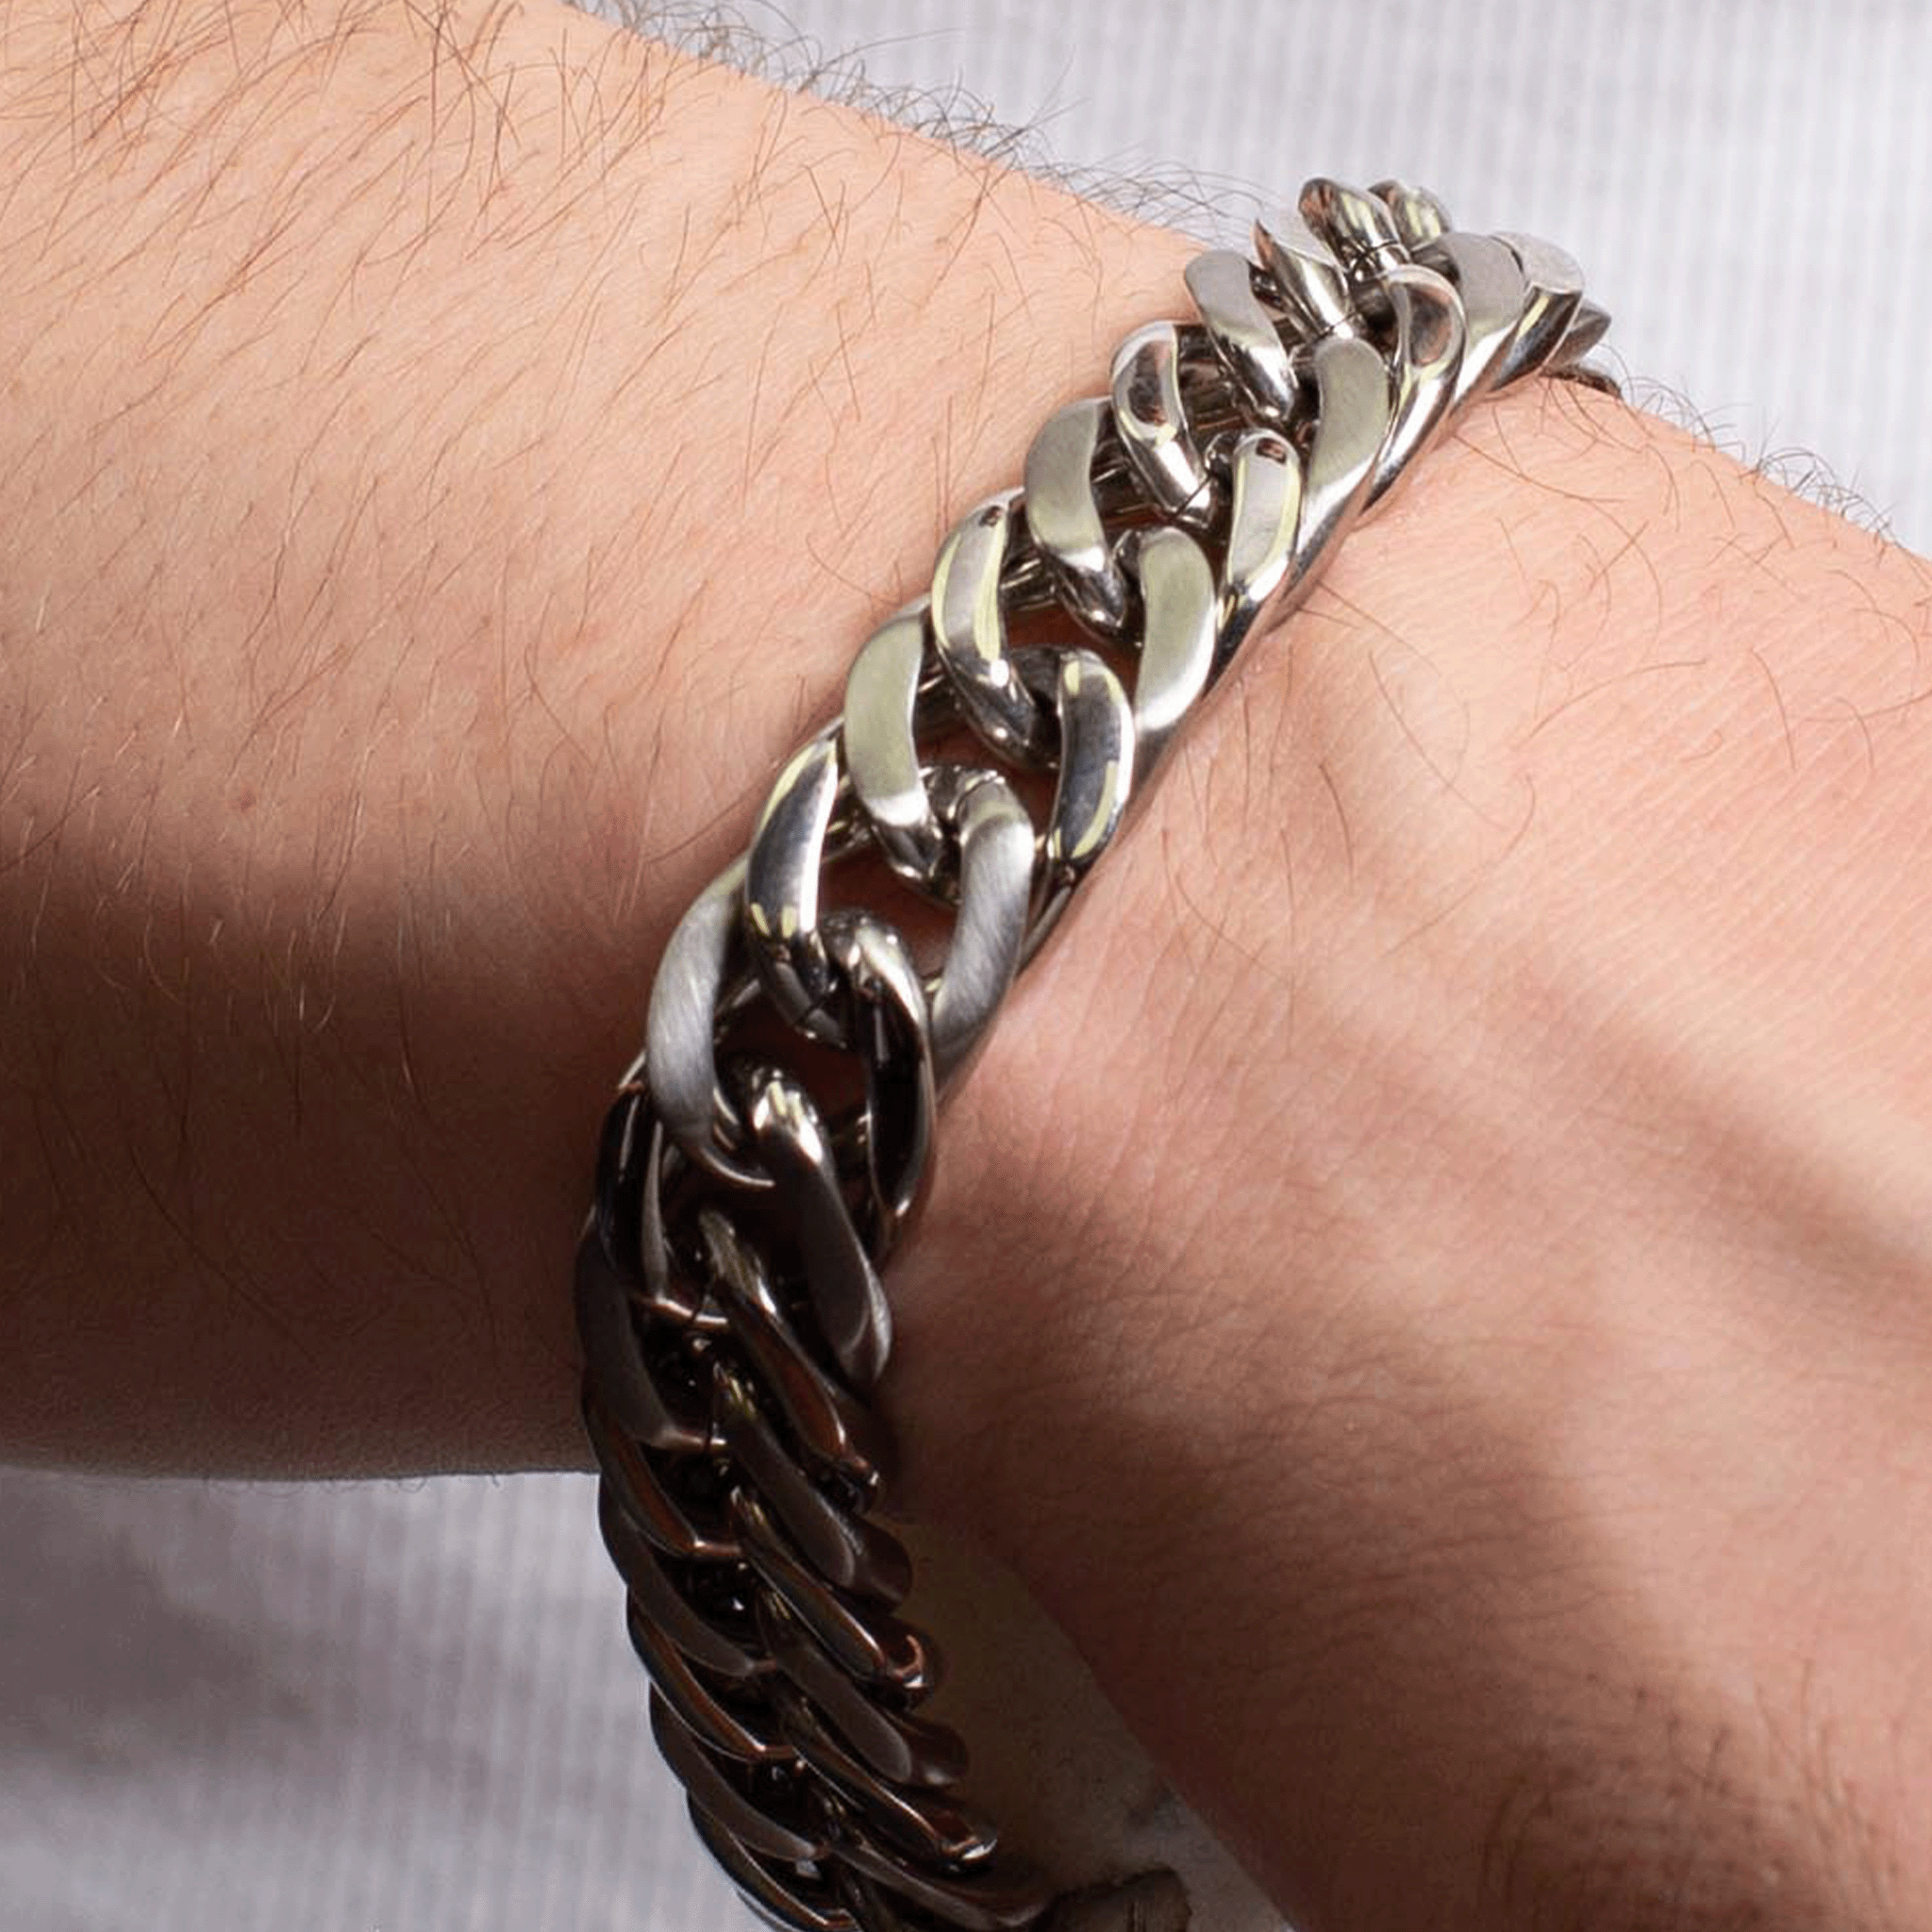 Maurizio Stainless Steel Chain Bracelet, 12mm Wide